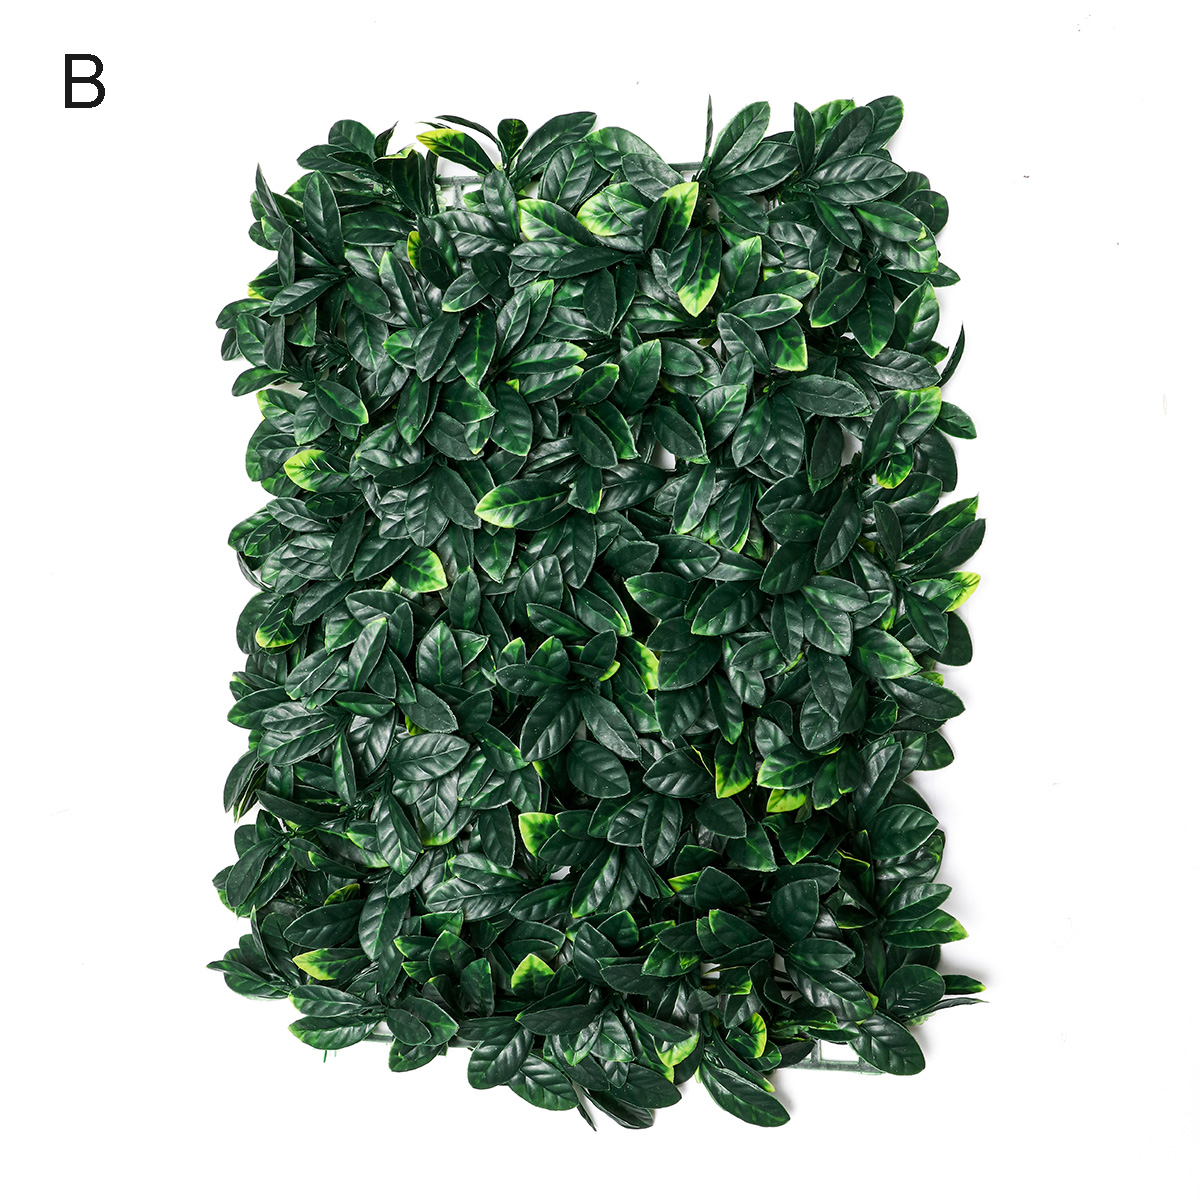 4060CM-Artificial-Topiary-Hedges-Panels-Plastic-Faux-Shrubs-Fence-Mat-Greenery-Wall-Backdrop-Decor-G-1729461-21